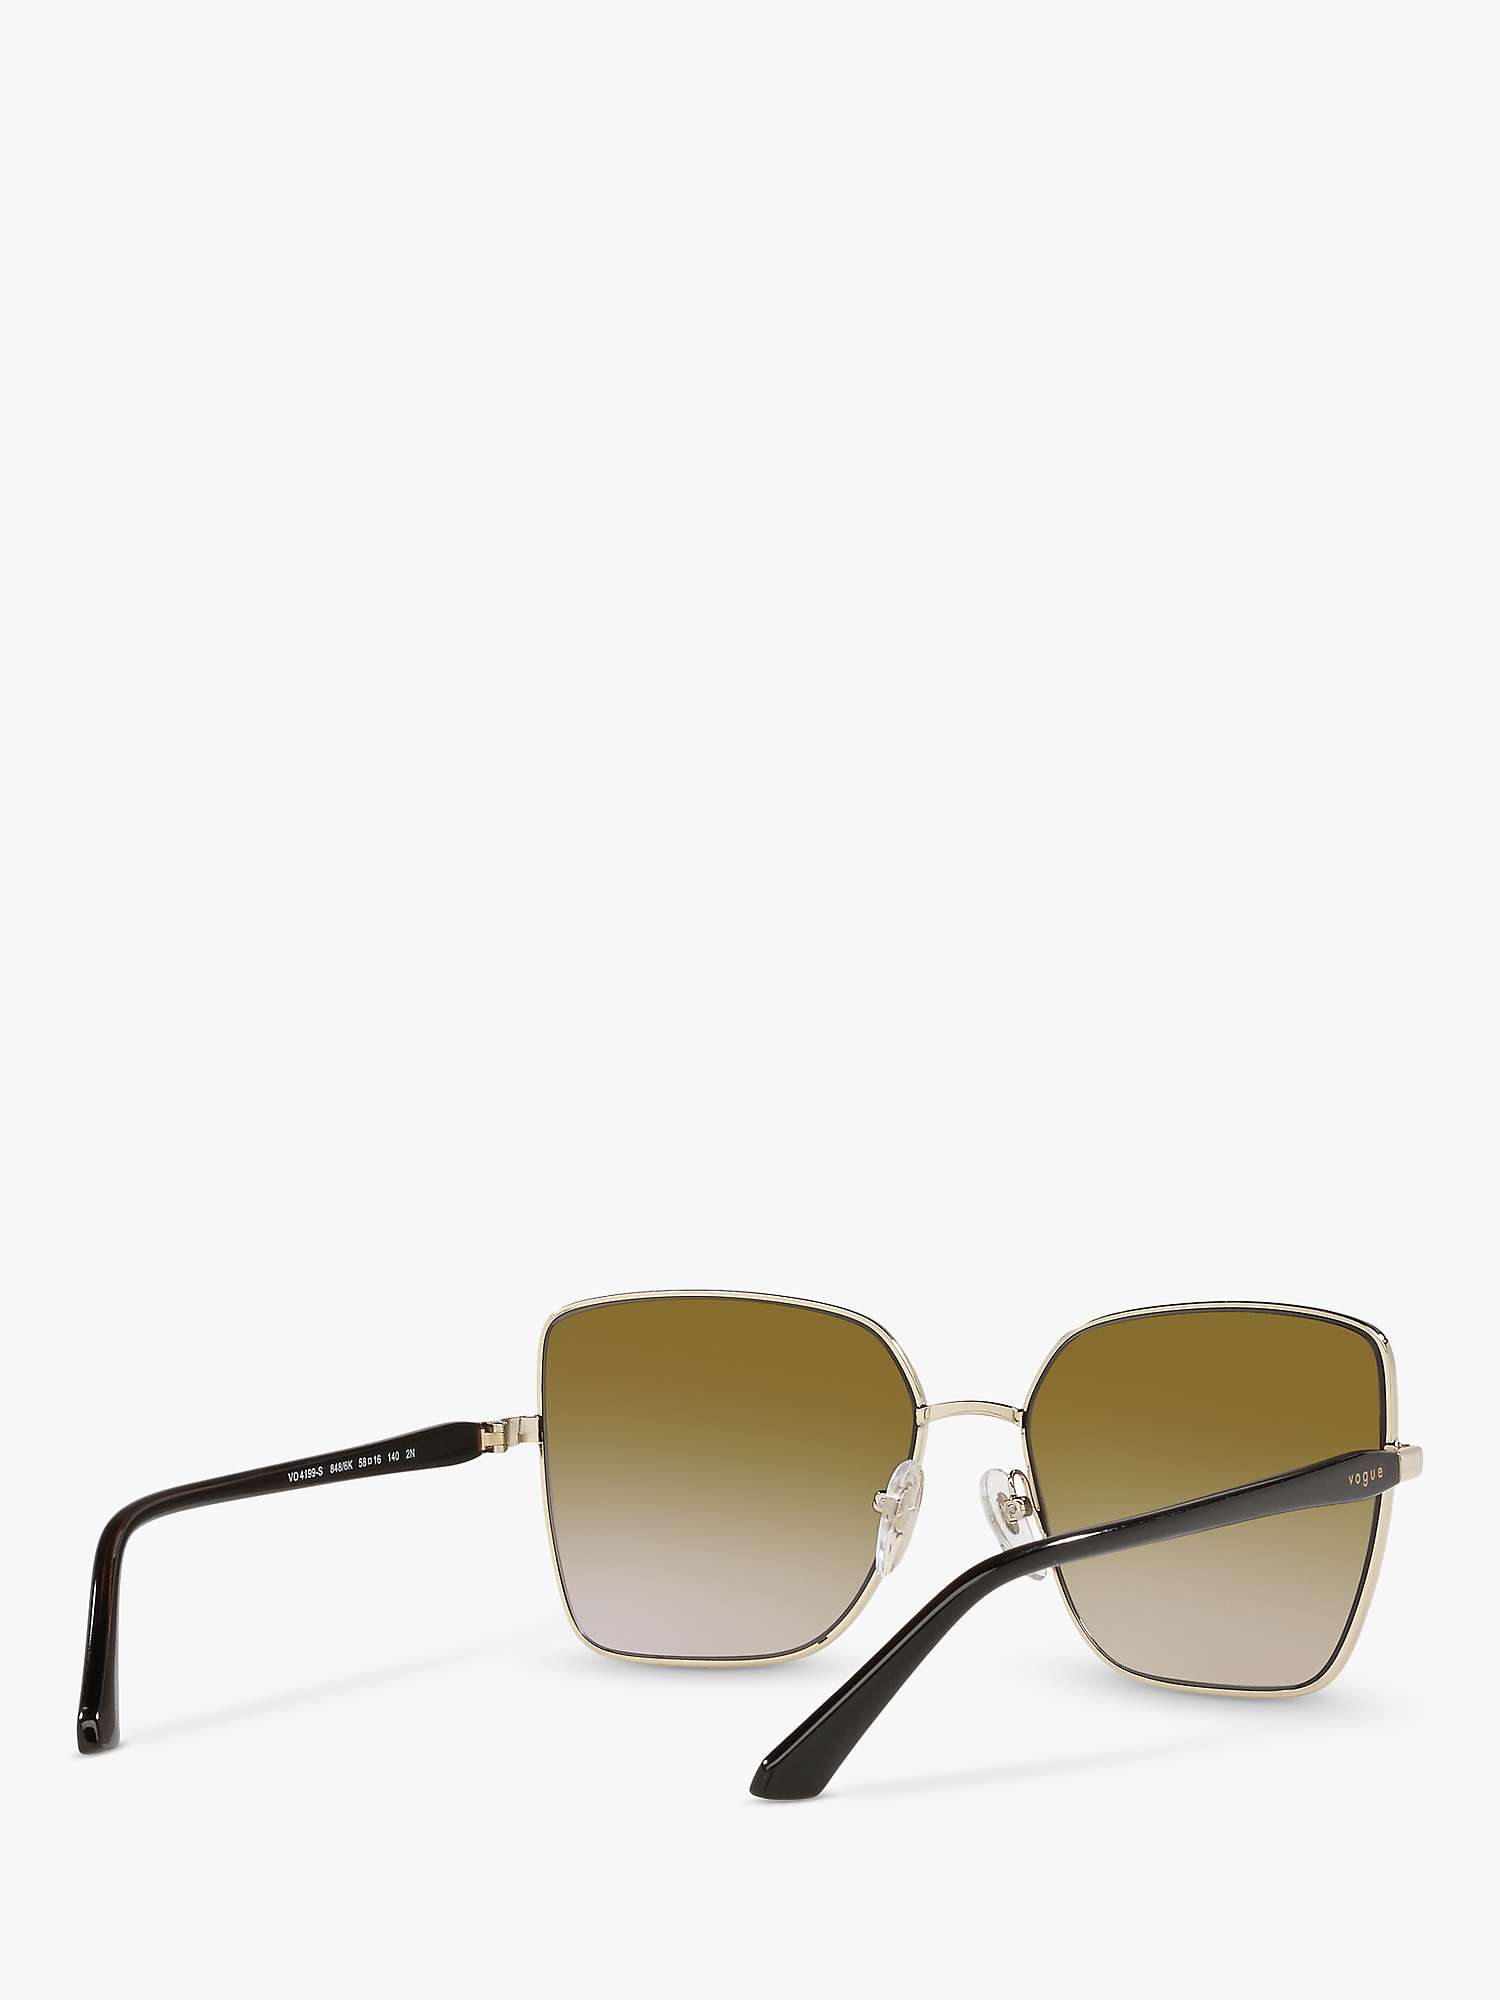 Buy Vogue VO4199S Women's Butterfly Sunglasses Online at johnlewis.com